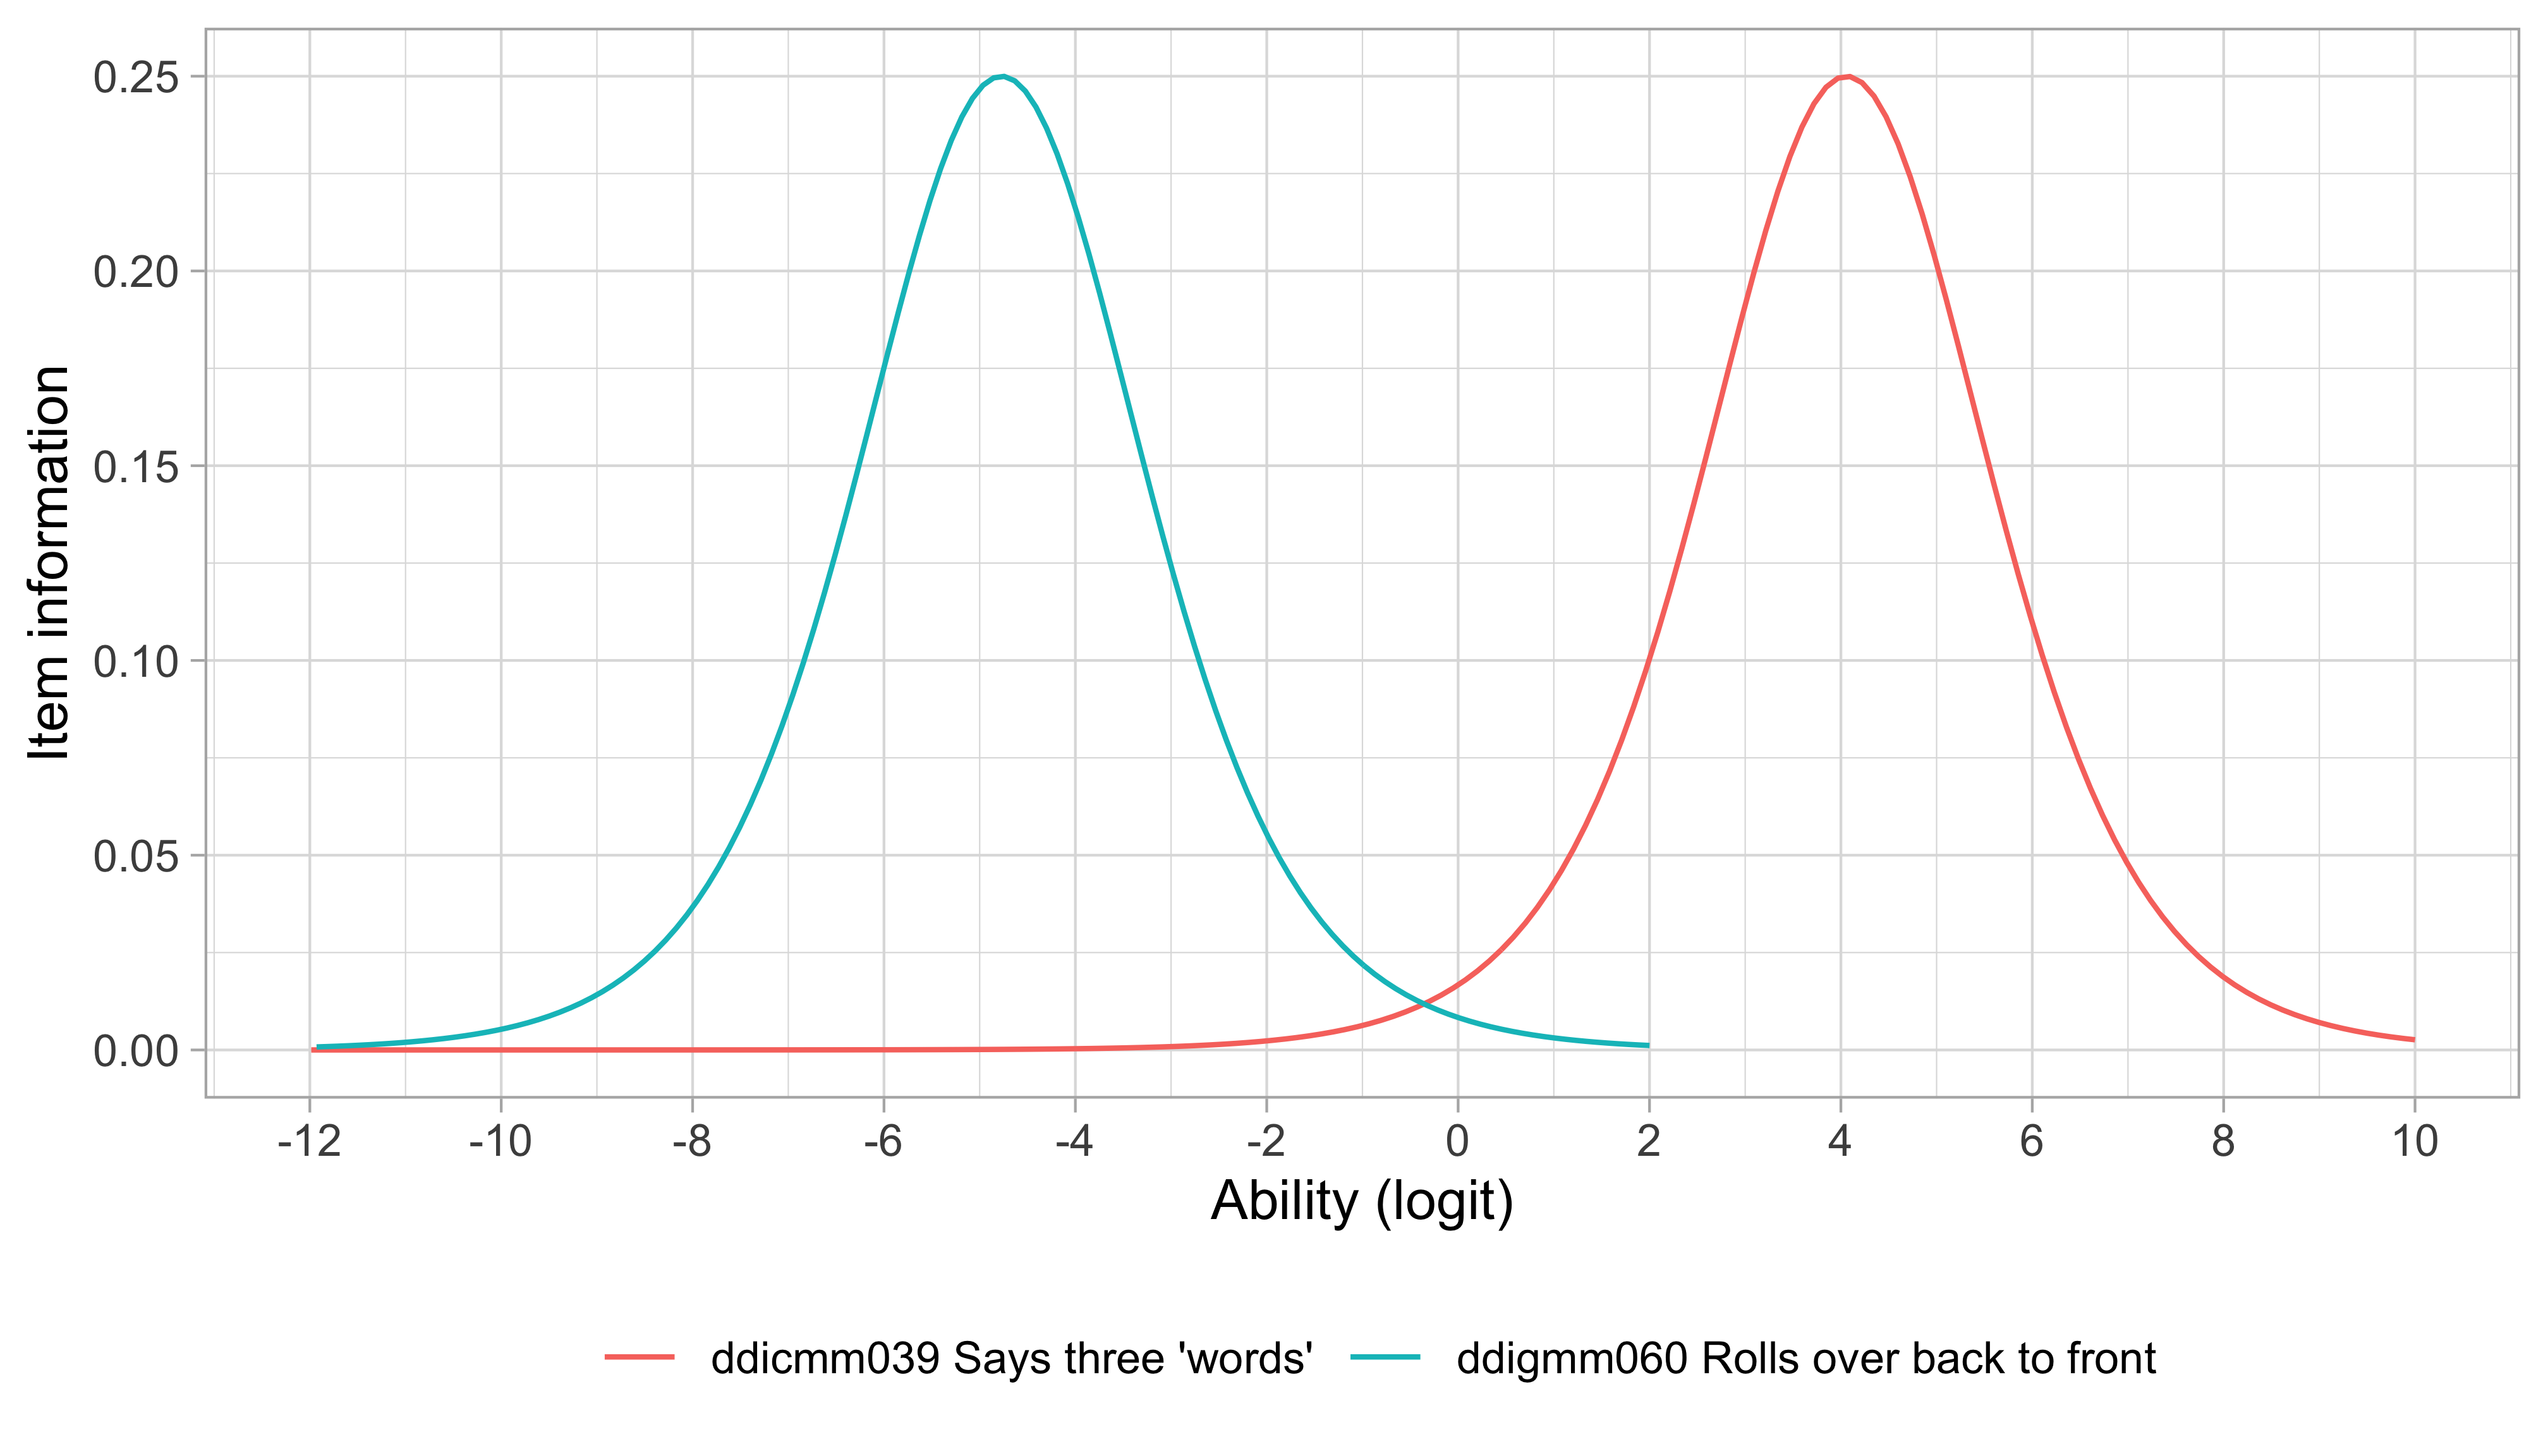 The item information curve for two milestones from the DDI.